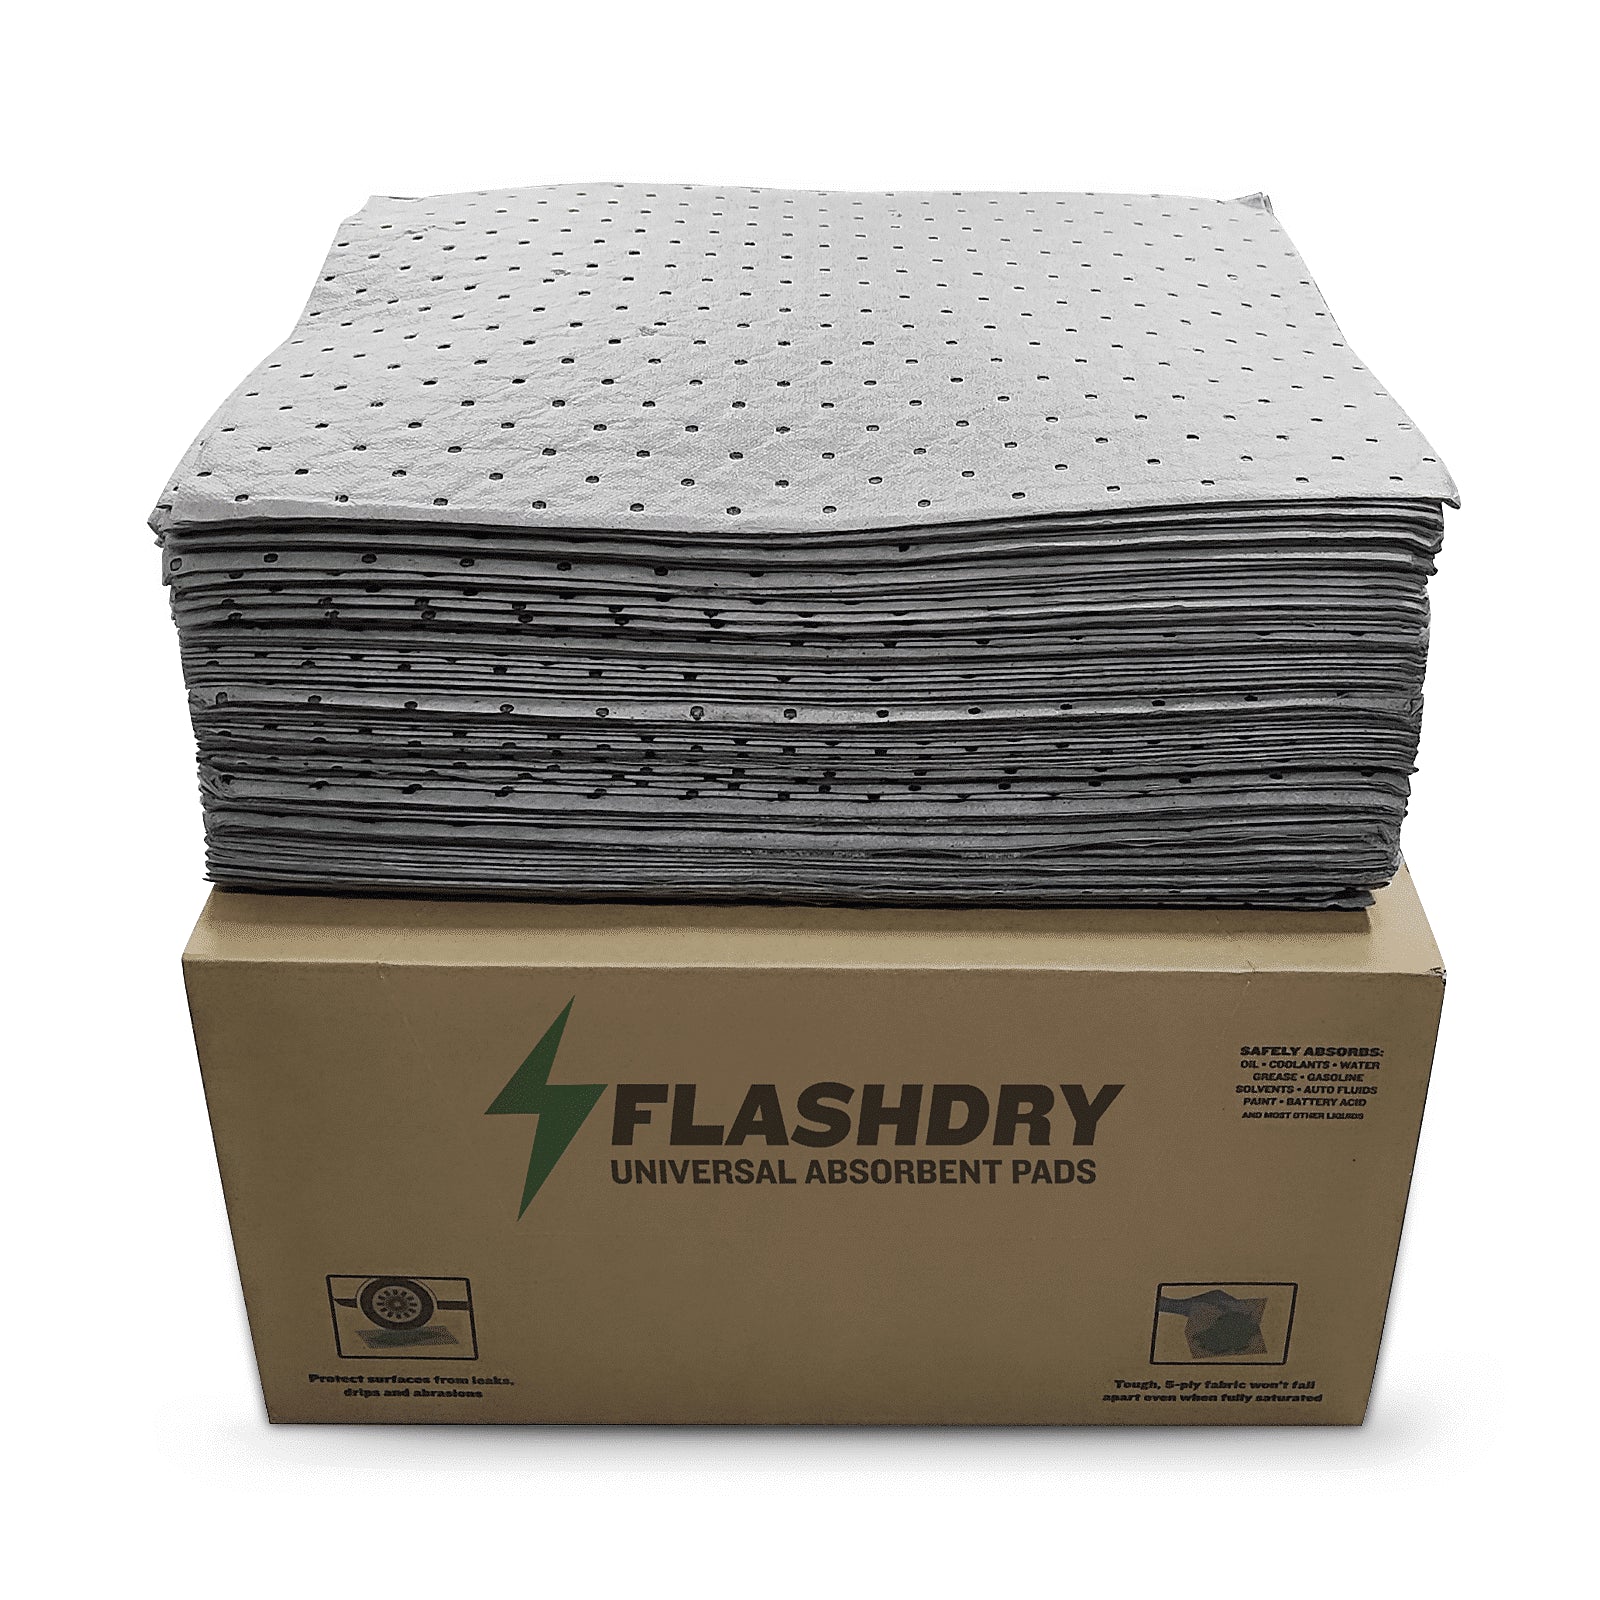 Universal absorbent pads for non-corrosive spills,15” X 18”, 100 units